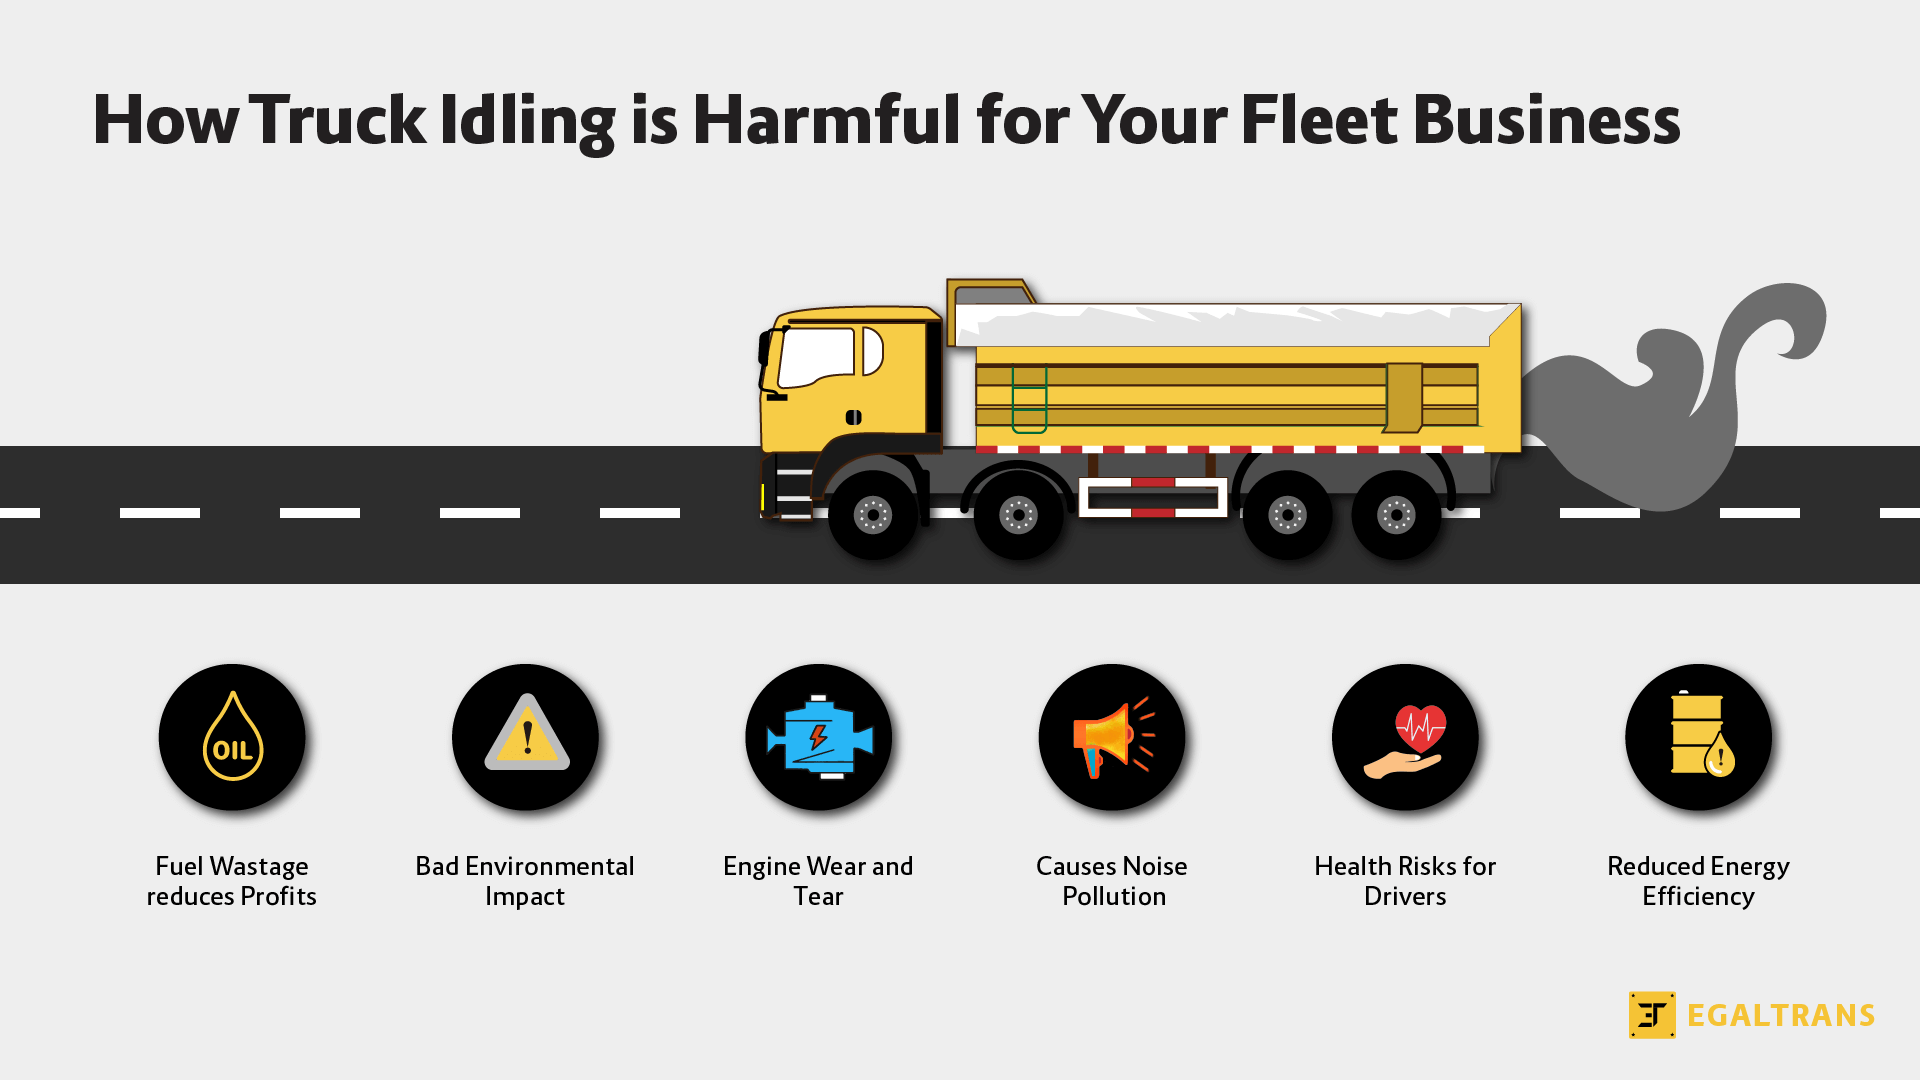 Harmful effects of truck idling reducing profit for fleet business - Egaltrans